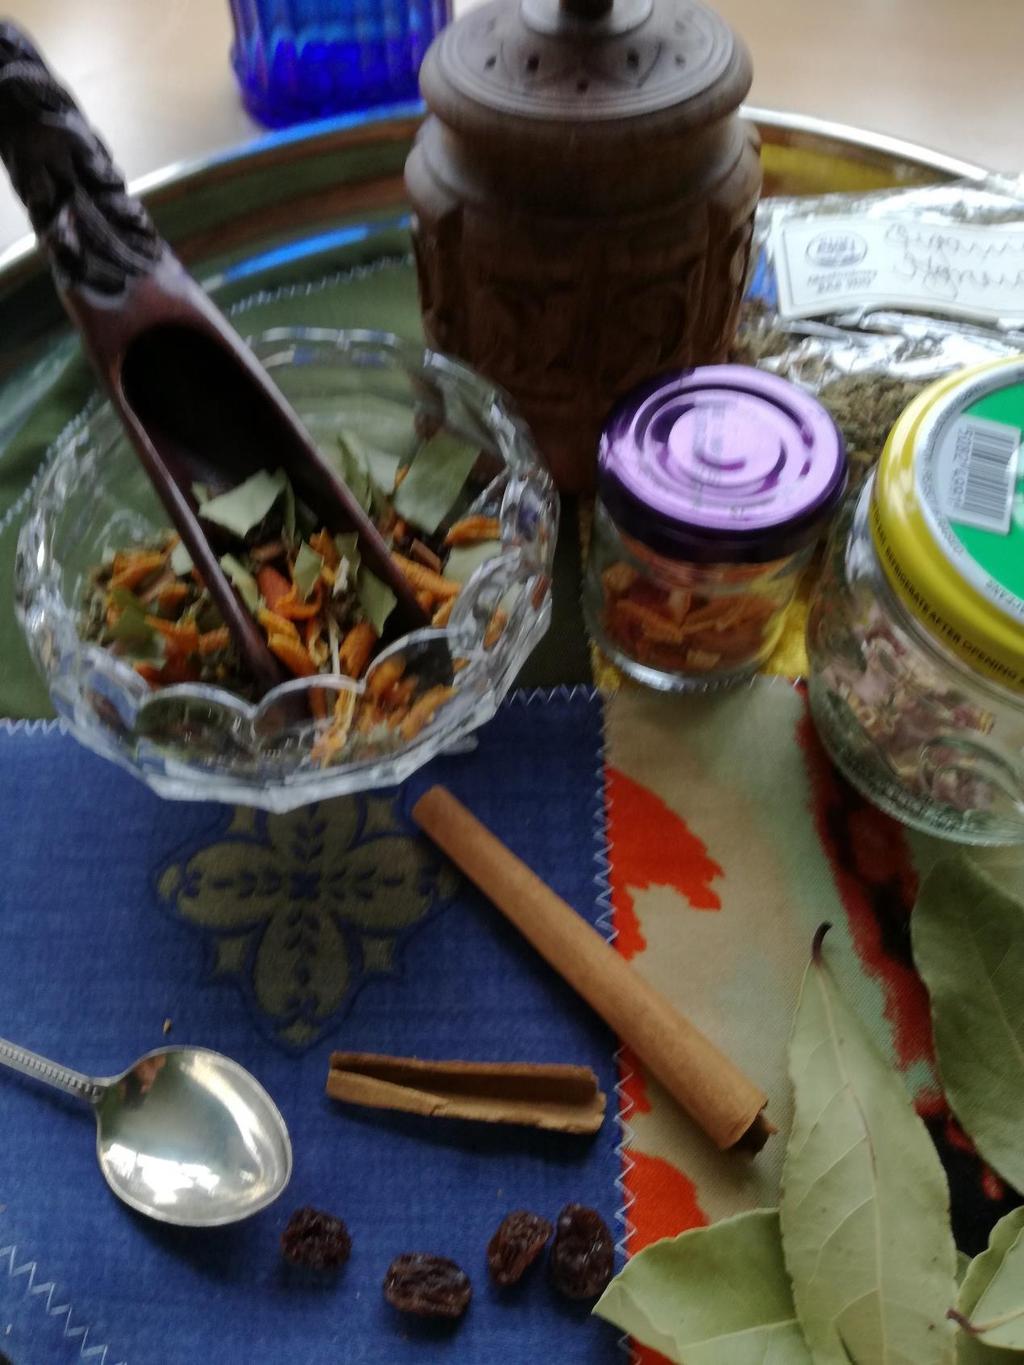 On the Tray - Have a ritual spoon to measure herbs, and ritual tea container in which to mix and store the tea until the ritual.